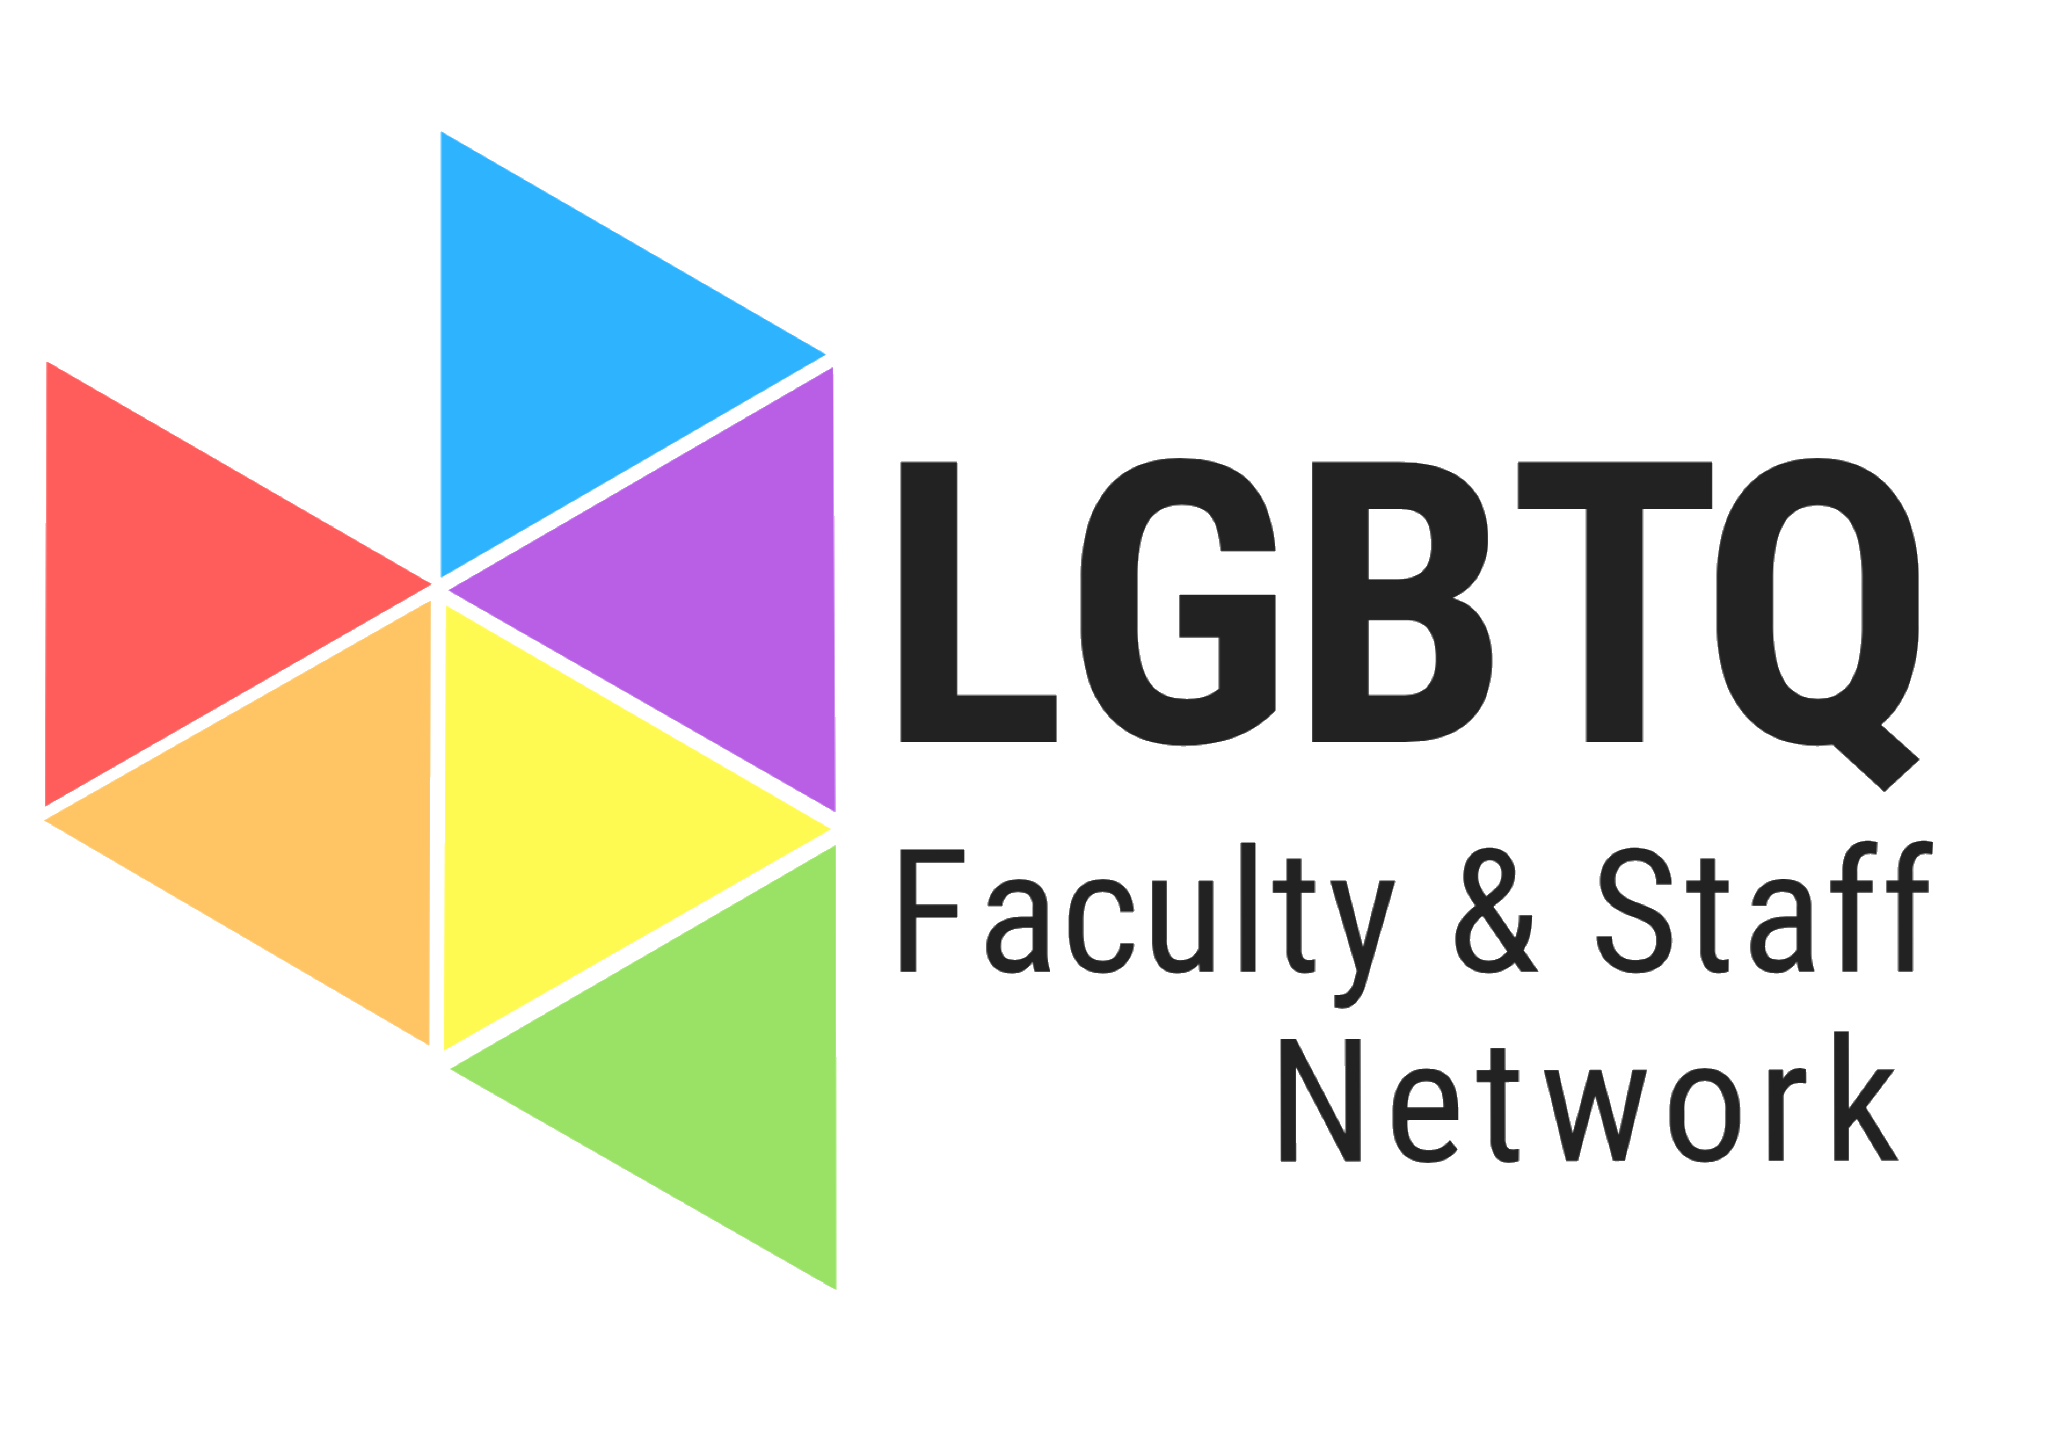 LGBTQ Faculty Staff Network png 1 - A Network, a Community, a Chosen Work Family